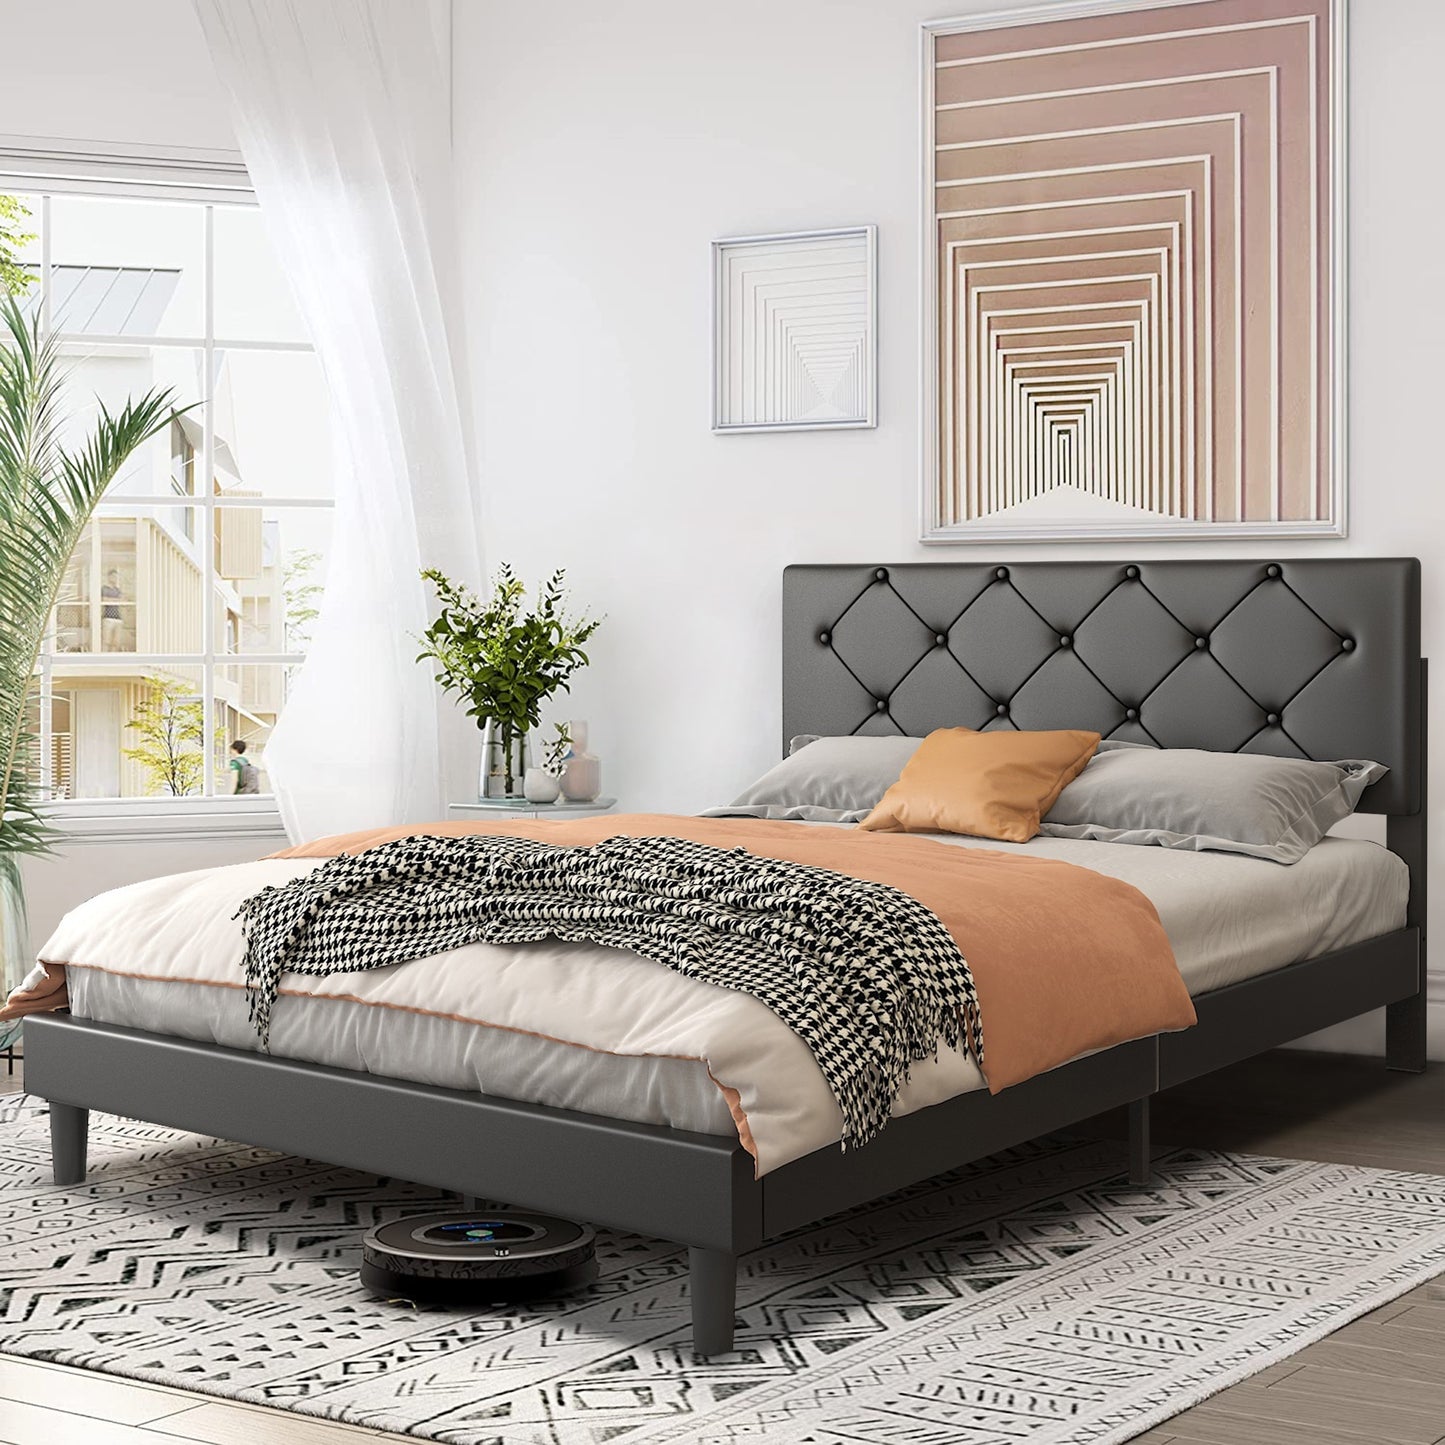 SYNGAR Black Faux Leather Upholstered Platform Bed Frame Queen Size with Height Adjustable Headboard, Metal Mattress Foundation with Strong Wooden Slat Support, No Box Spring Needed